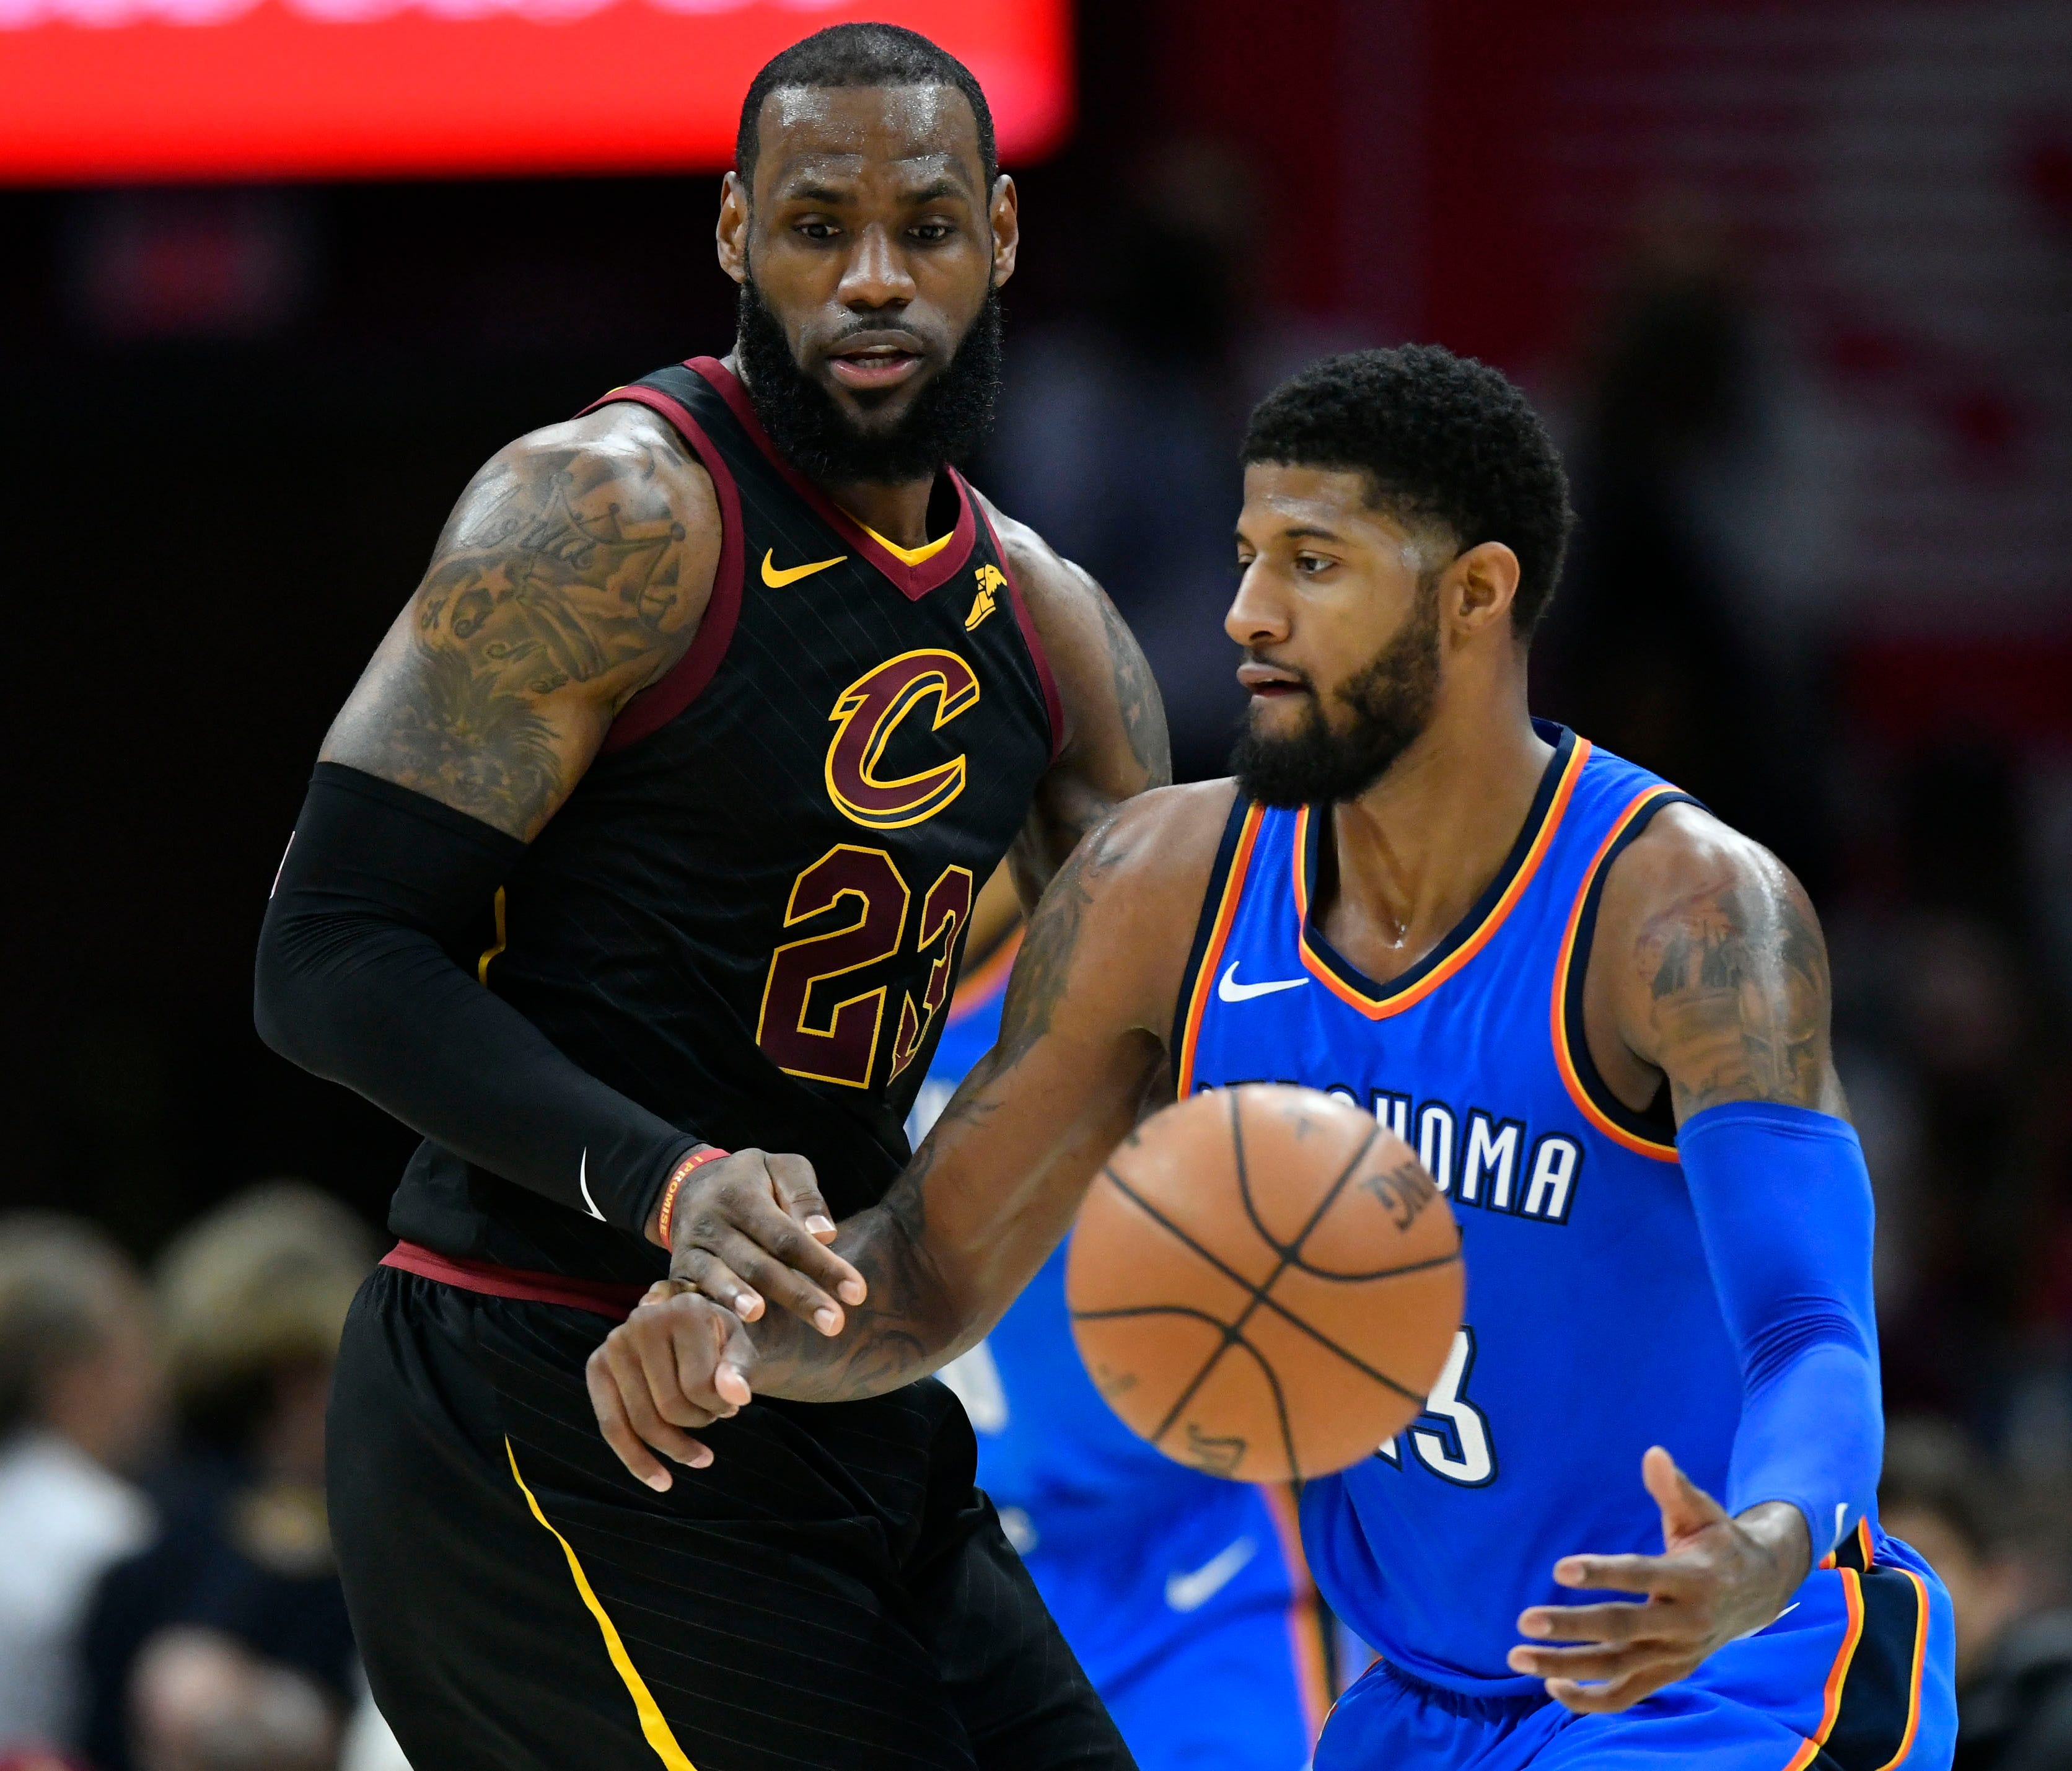 Cleveland Cavaliers forward LeBron James (23) defends Oklahoma City Thunder forward Paul George (13) in the third quarter at Quicken Loans Arena.